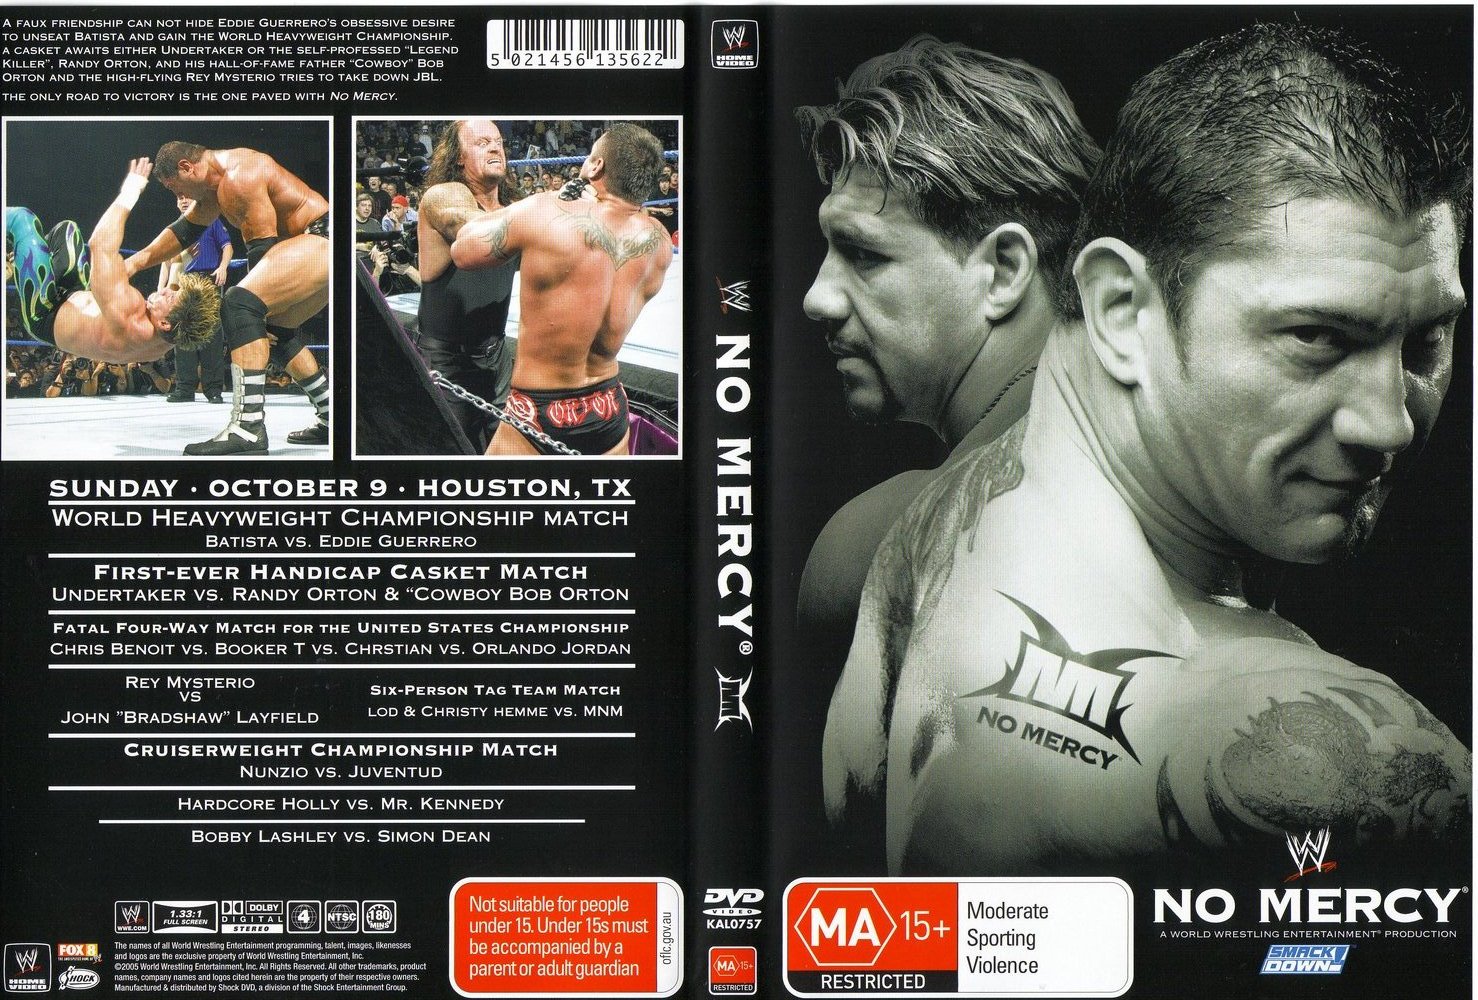 Jaquette DVD WWE No Mercy 2005